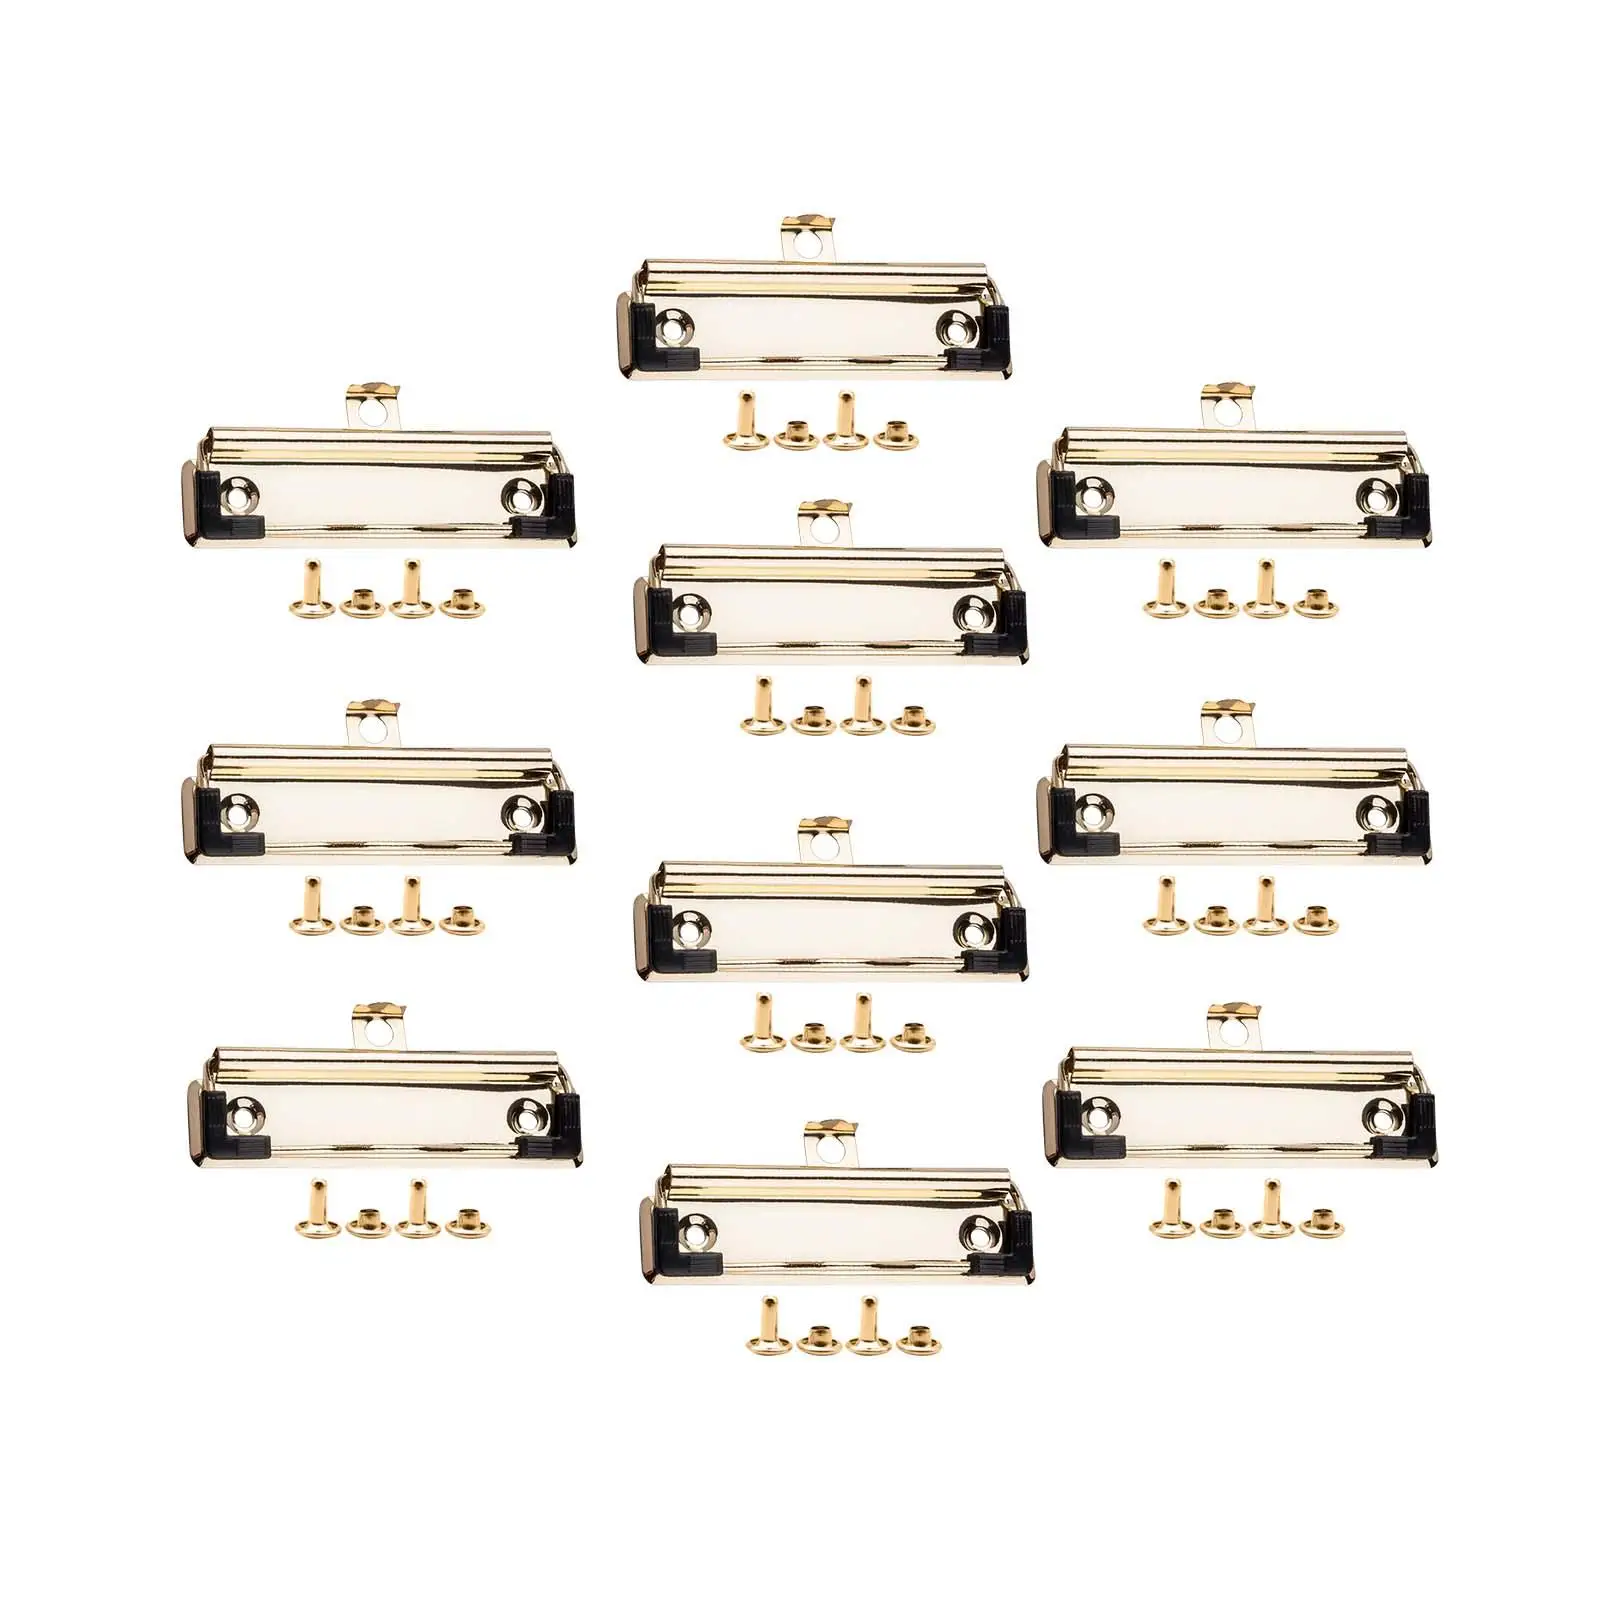 10x Document File Board Clips Metal Mountable with Rubber Feet Office Supplies Heavy Duty Clipboard Clamps Small Clipboard Clips